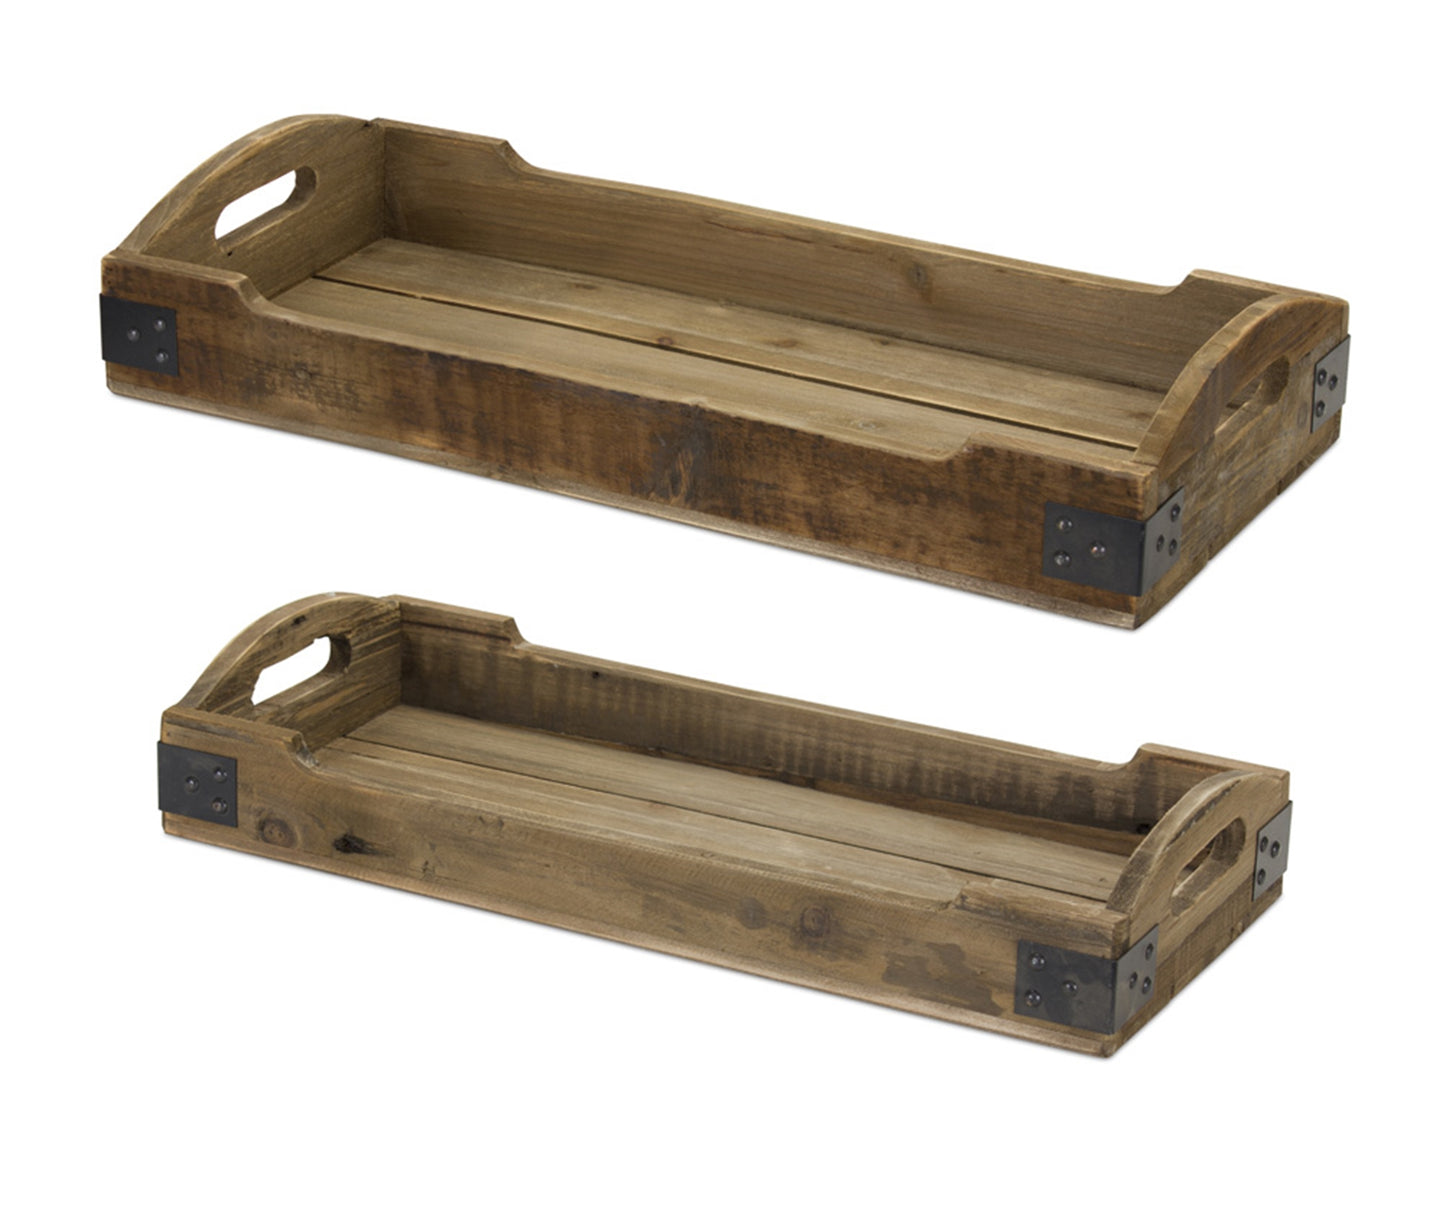 Rustic Wooden Iron Crate Trays, natural fir wood composition paired with the traditional iron metal.